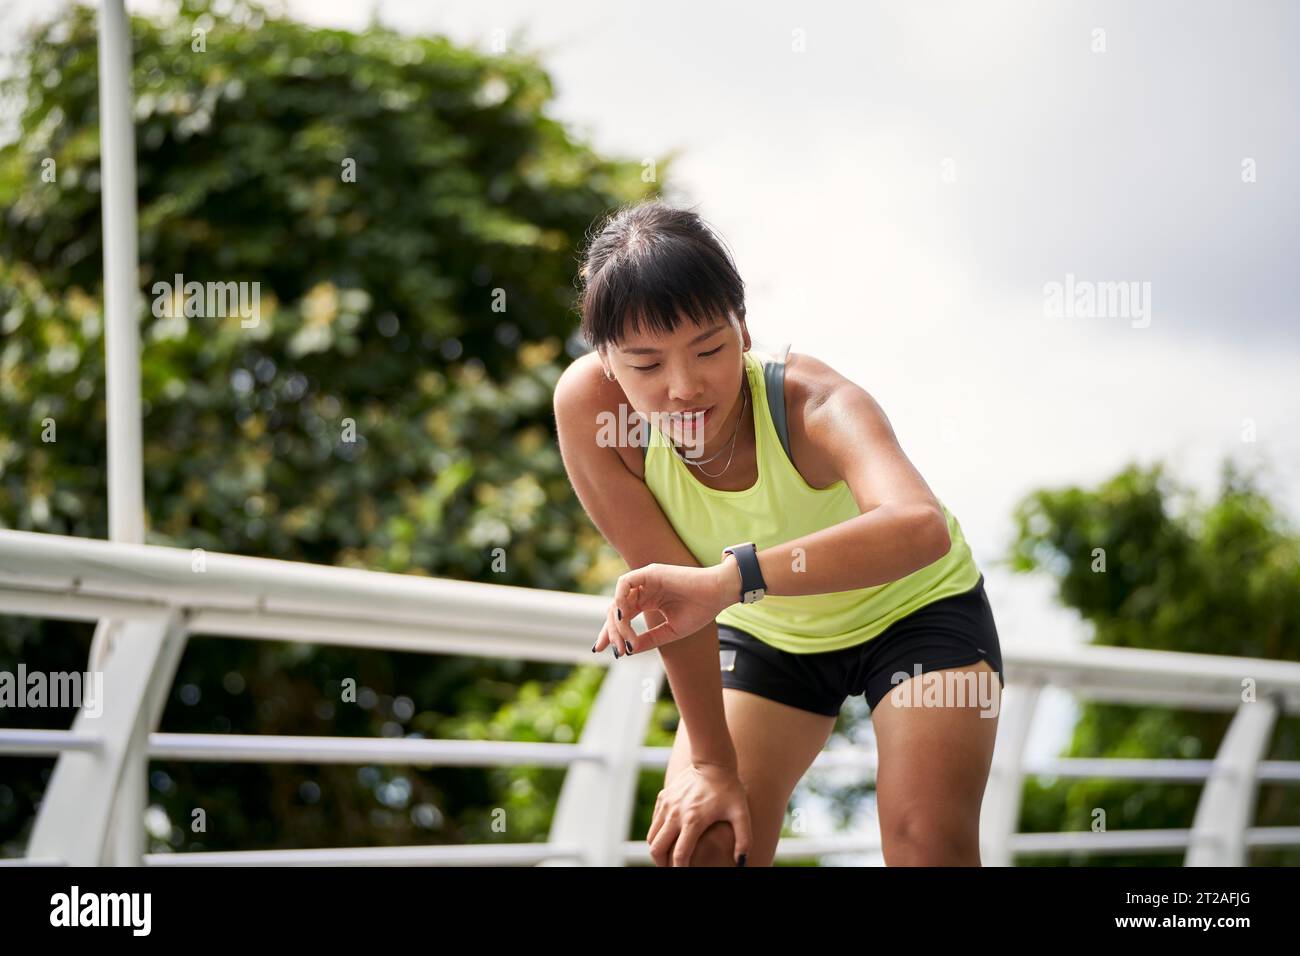 young asian woman female athlete exercising training outdoors Stock Photo